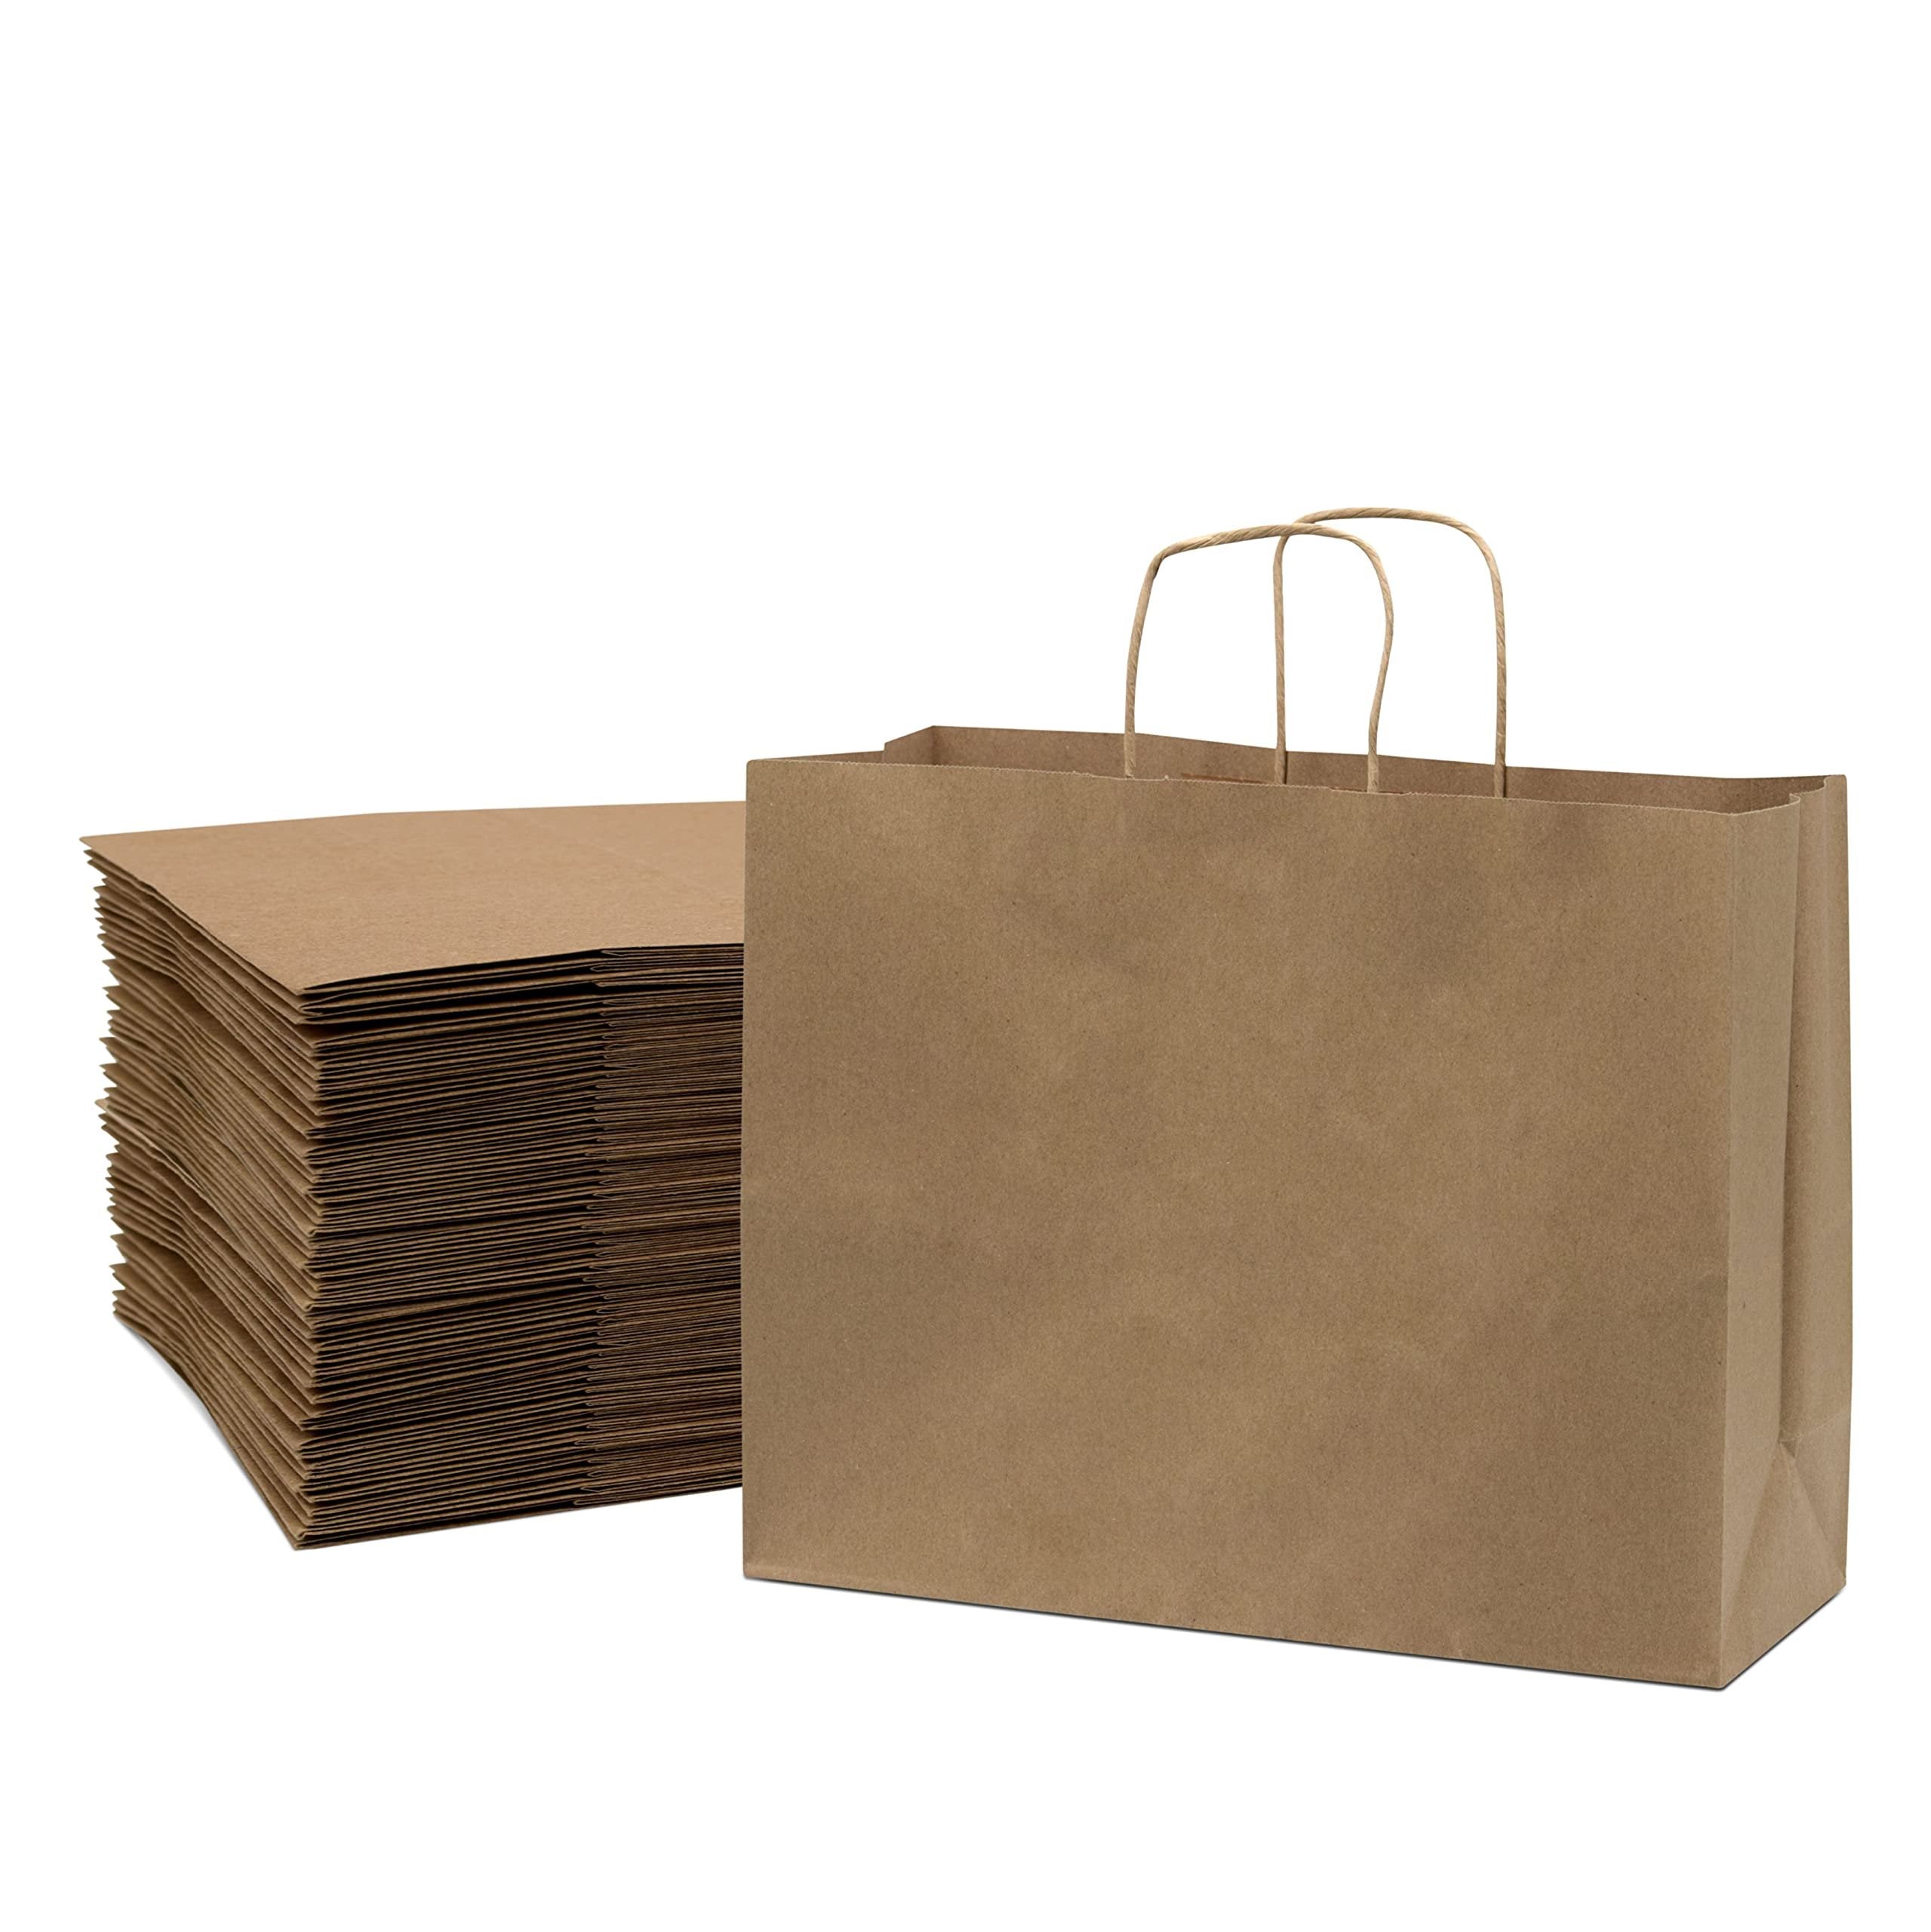 Prime Line Packaging Brown Paper Bags - 16x6x12 Inch (100 Pack) with Handles, Perfect for Small Business, Retail, Merchandise, and Parties - Free Shipping & Returns